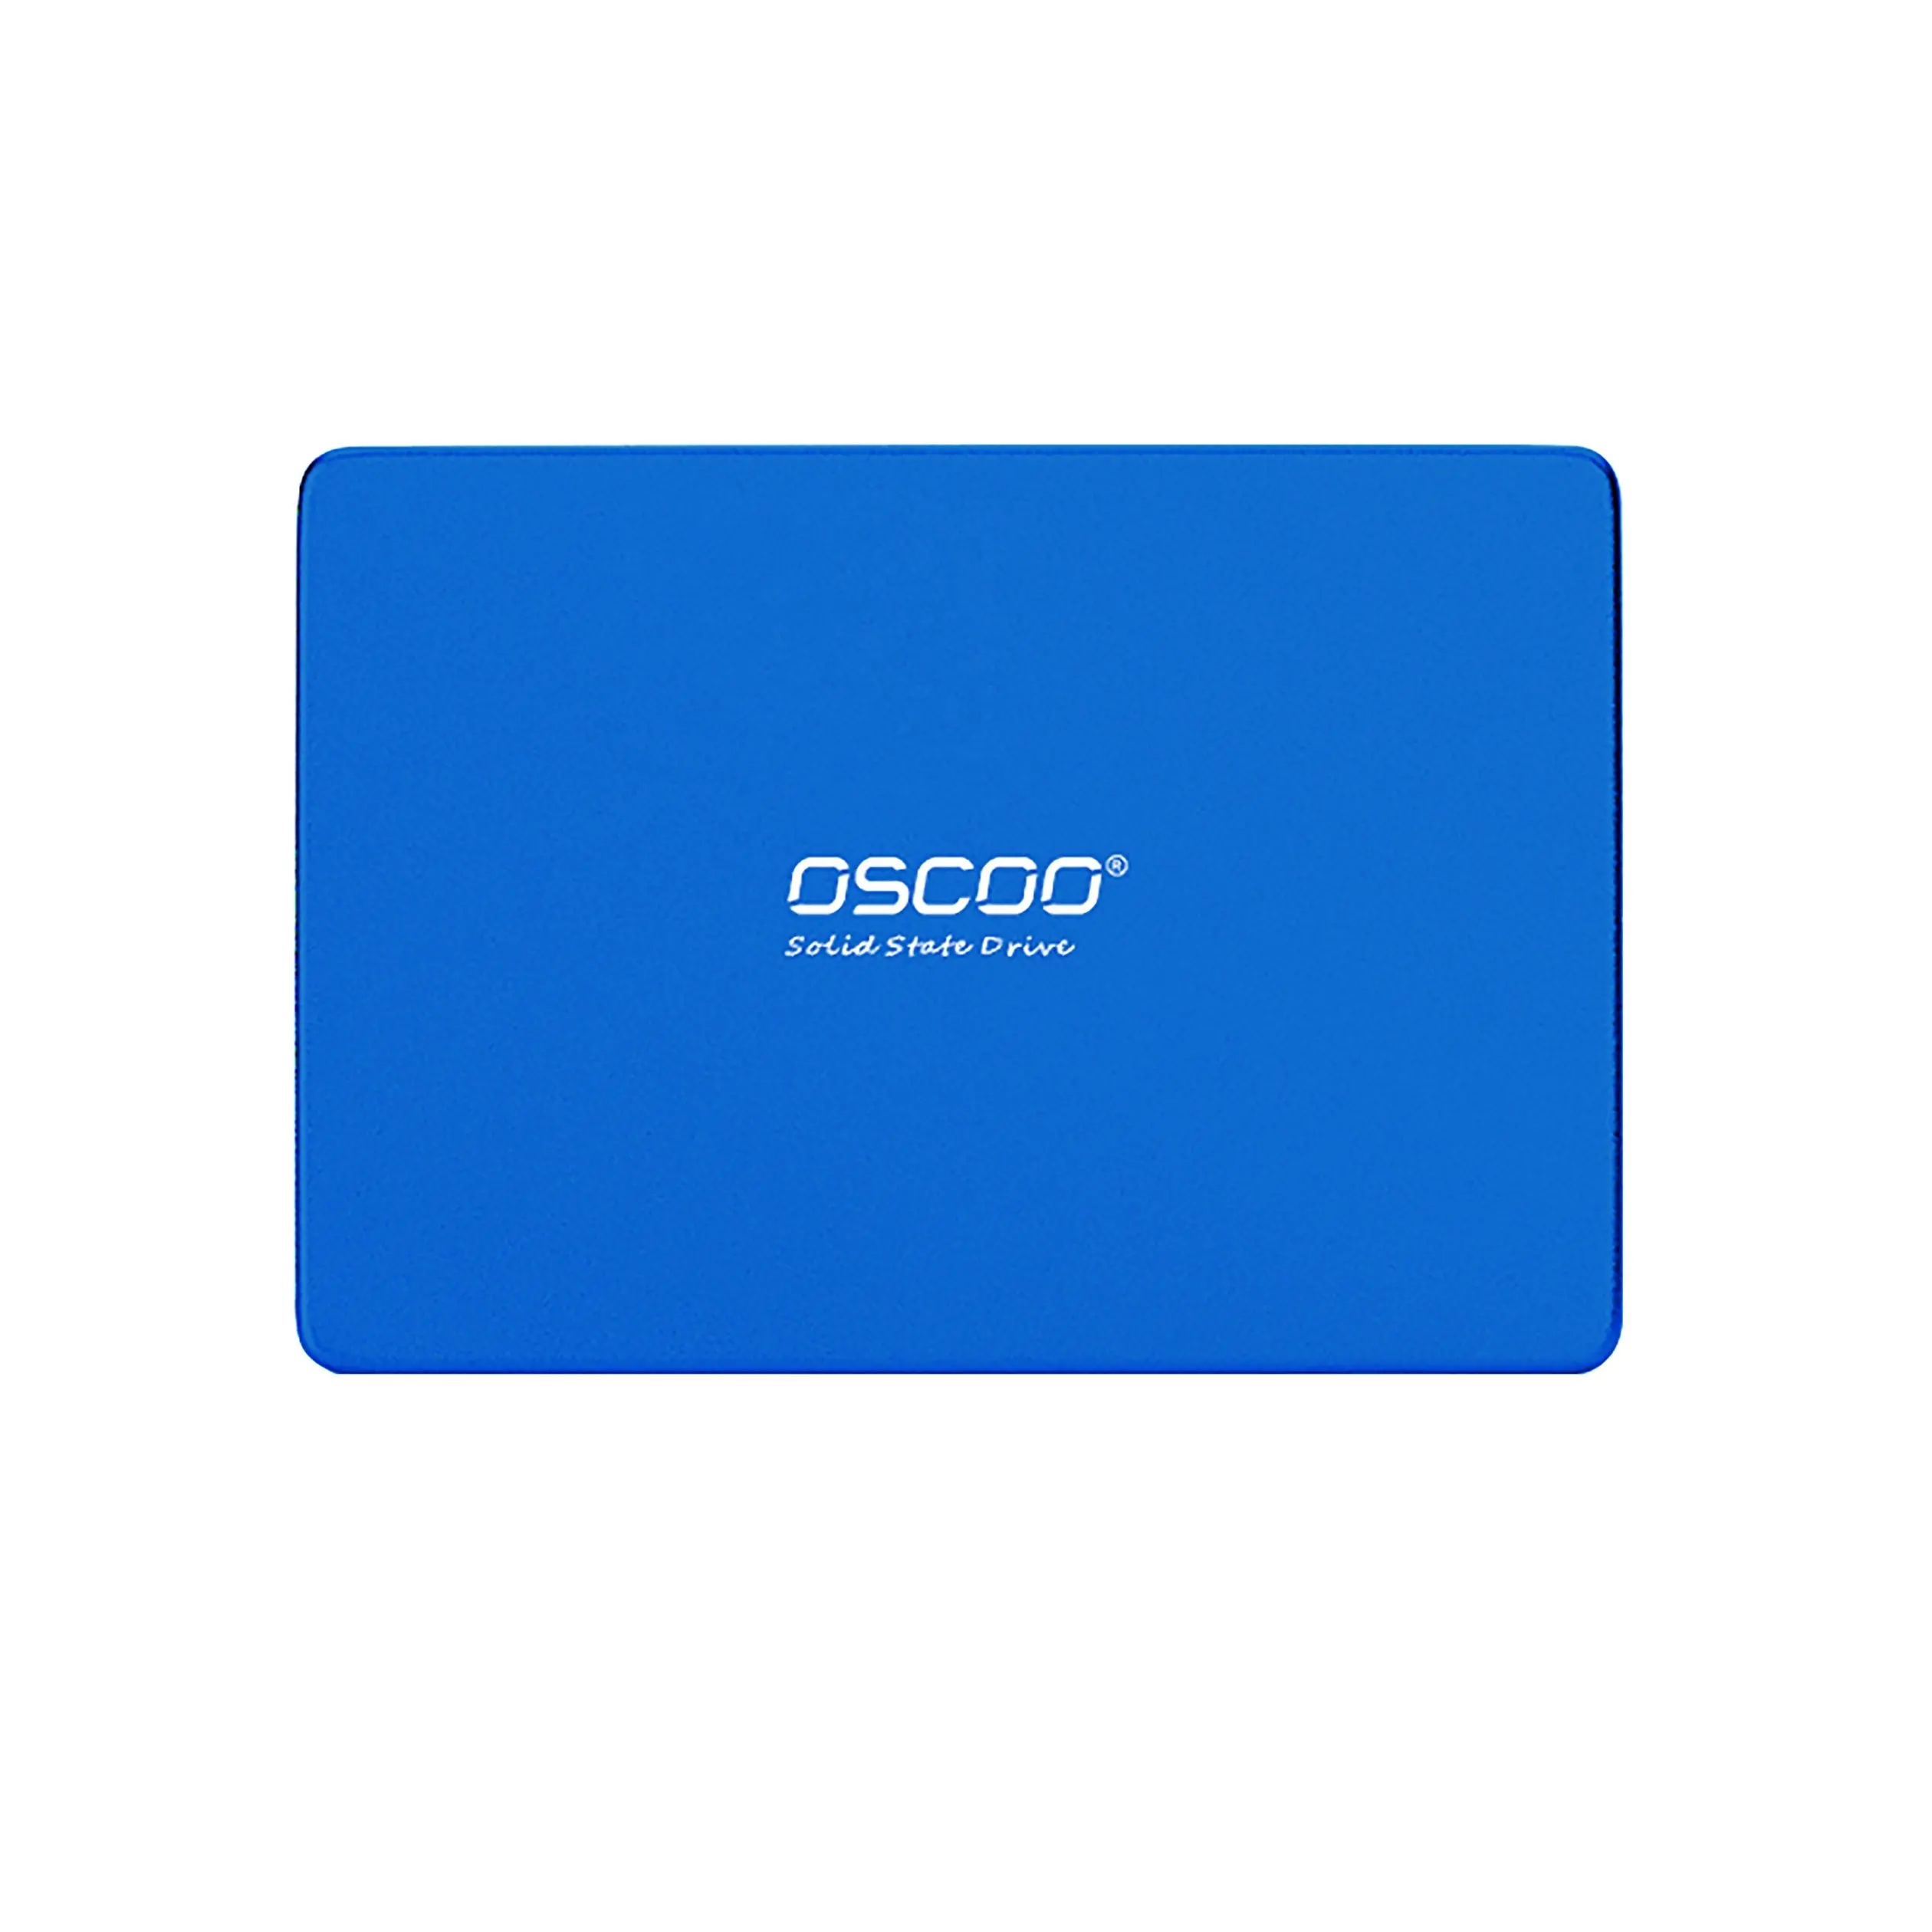 OSCOO High Quality Factory Direct Sale 240GB SATA 3 Solid State Drive SSD Hard Drive